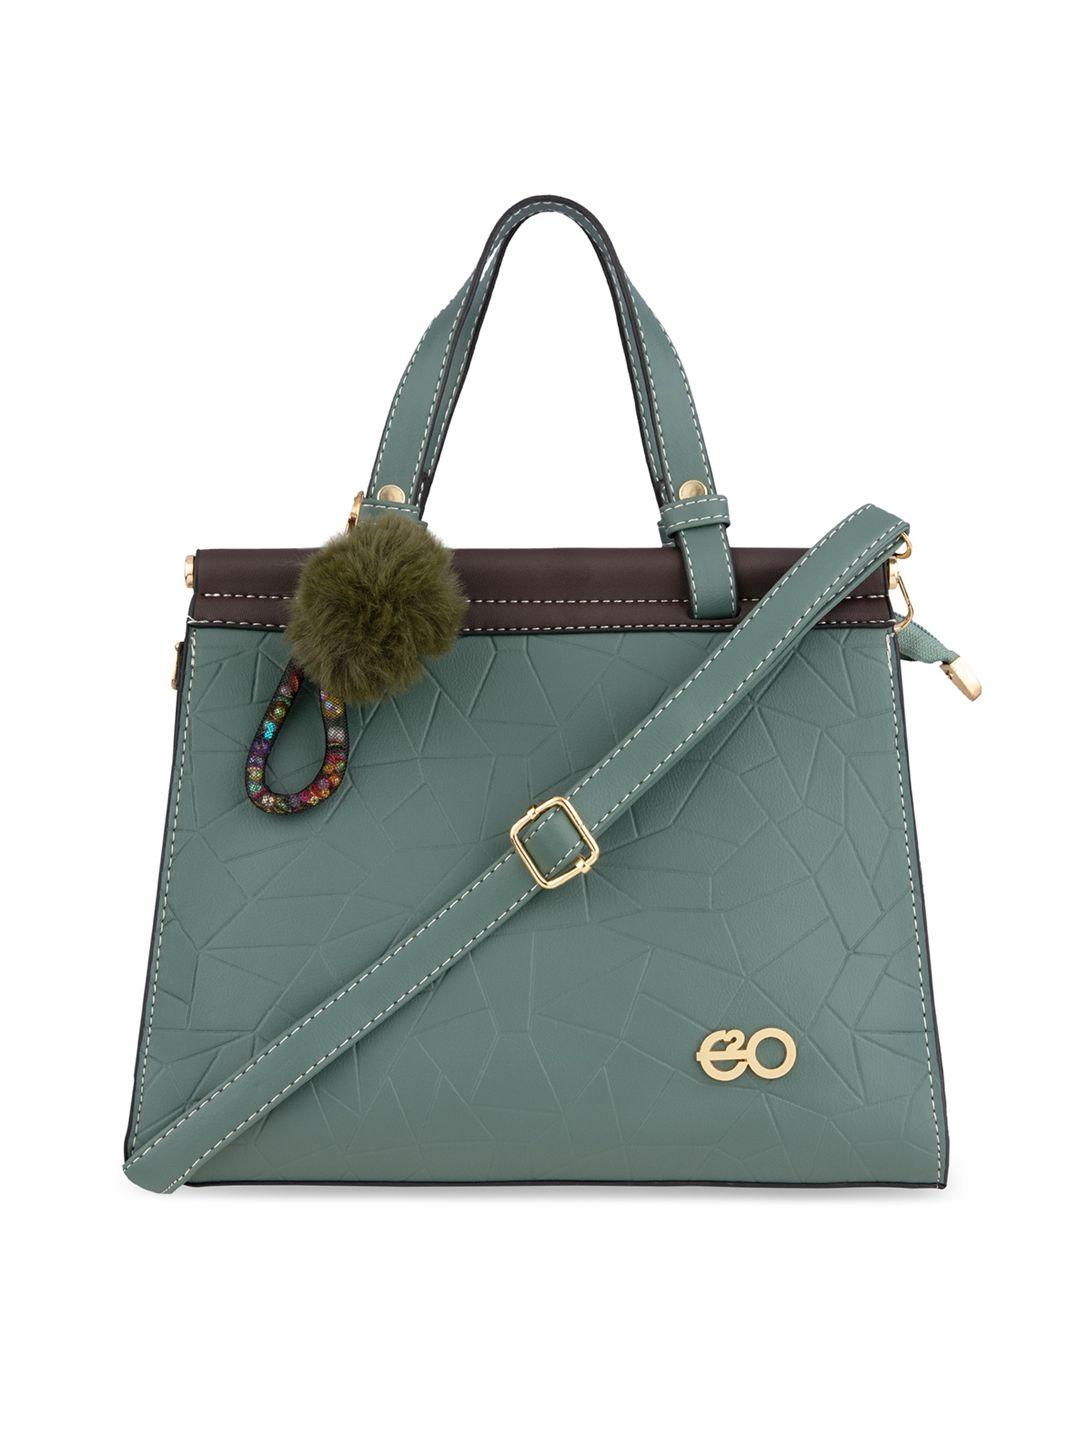 e2o green textured pu structured handheld bag